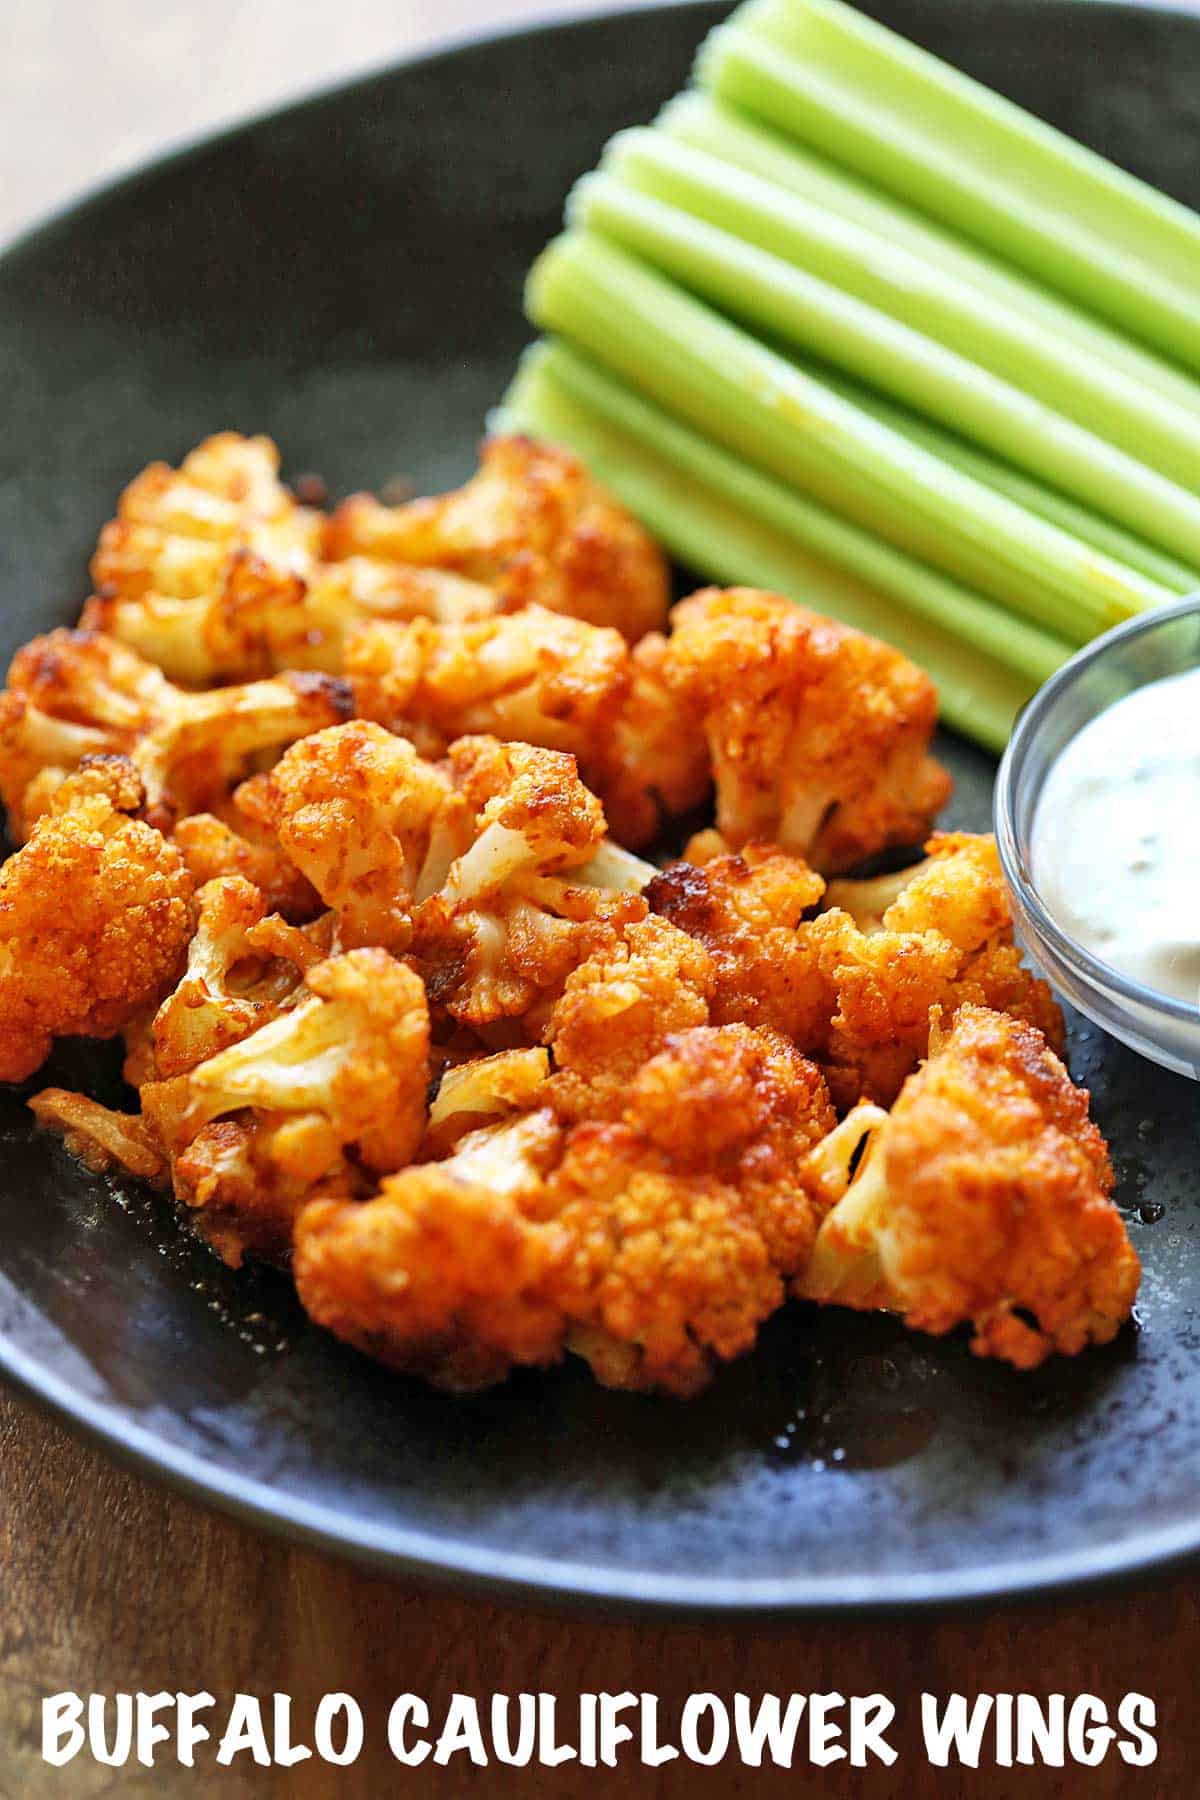 Buffalo cauliflower wings, served with celery and blue cheese dressing.